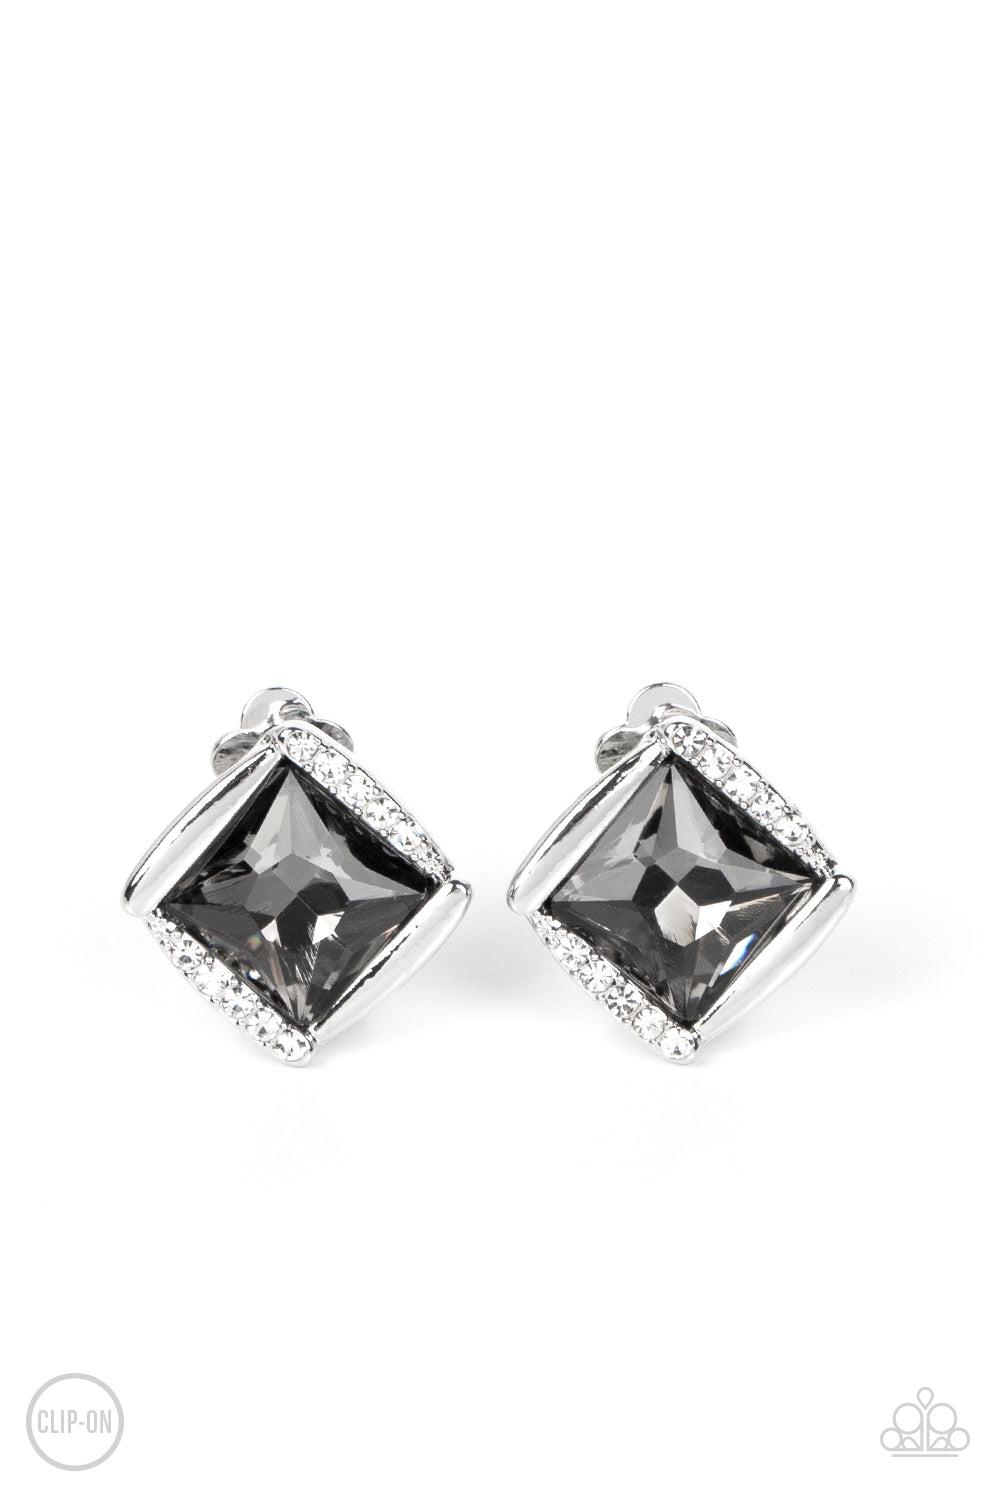 Sparkle Squared Silver Rhinestone Clip-on Earrings - Paparazzi Accessories- lightbox - CarasShop.com - $5 Jewelry by Cara Jewels